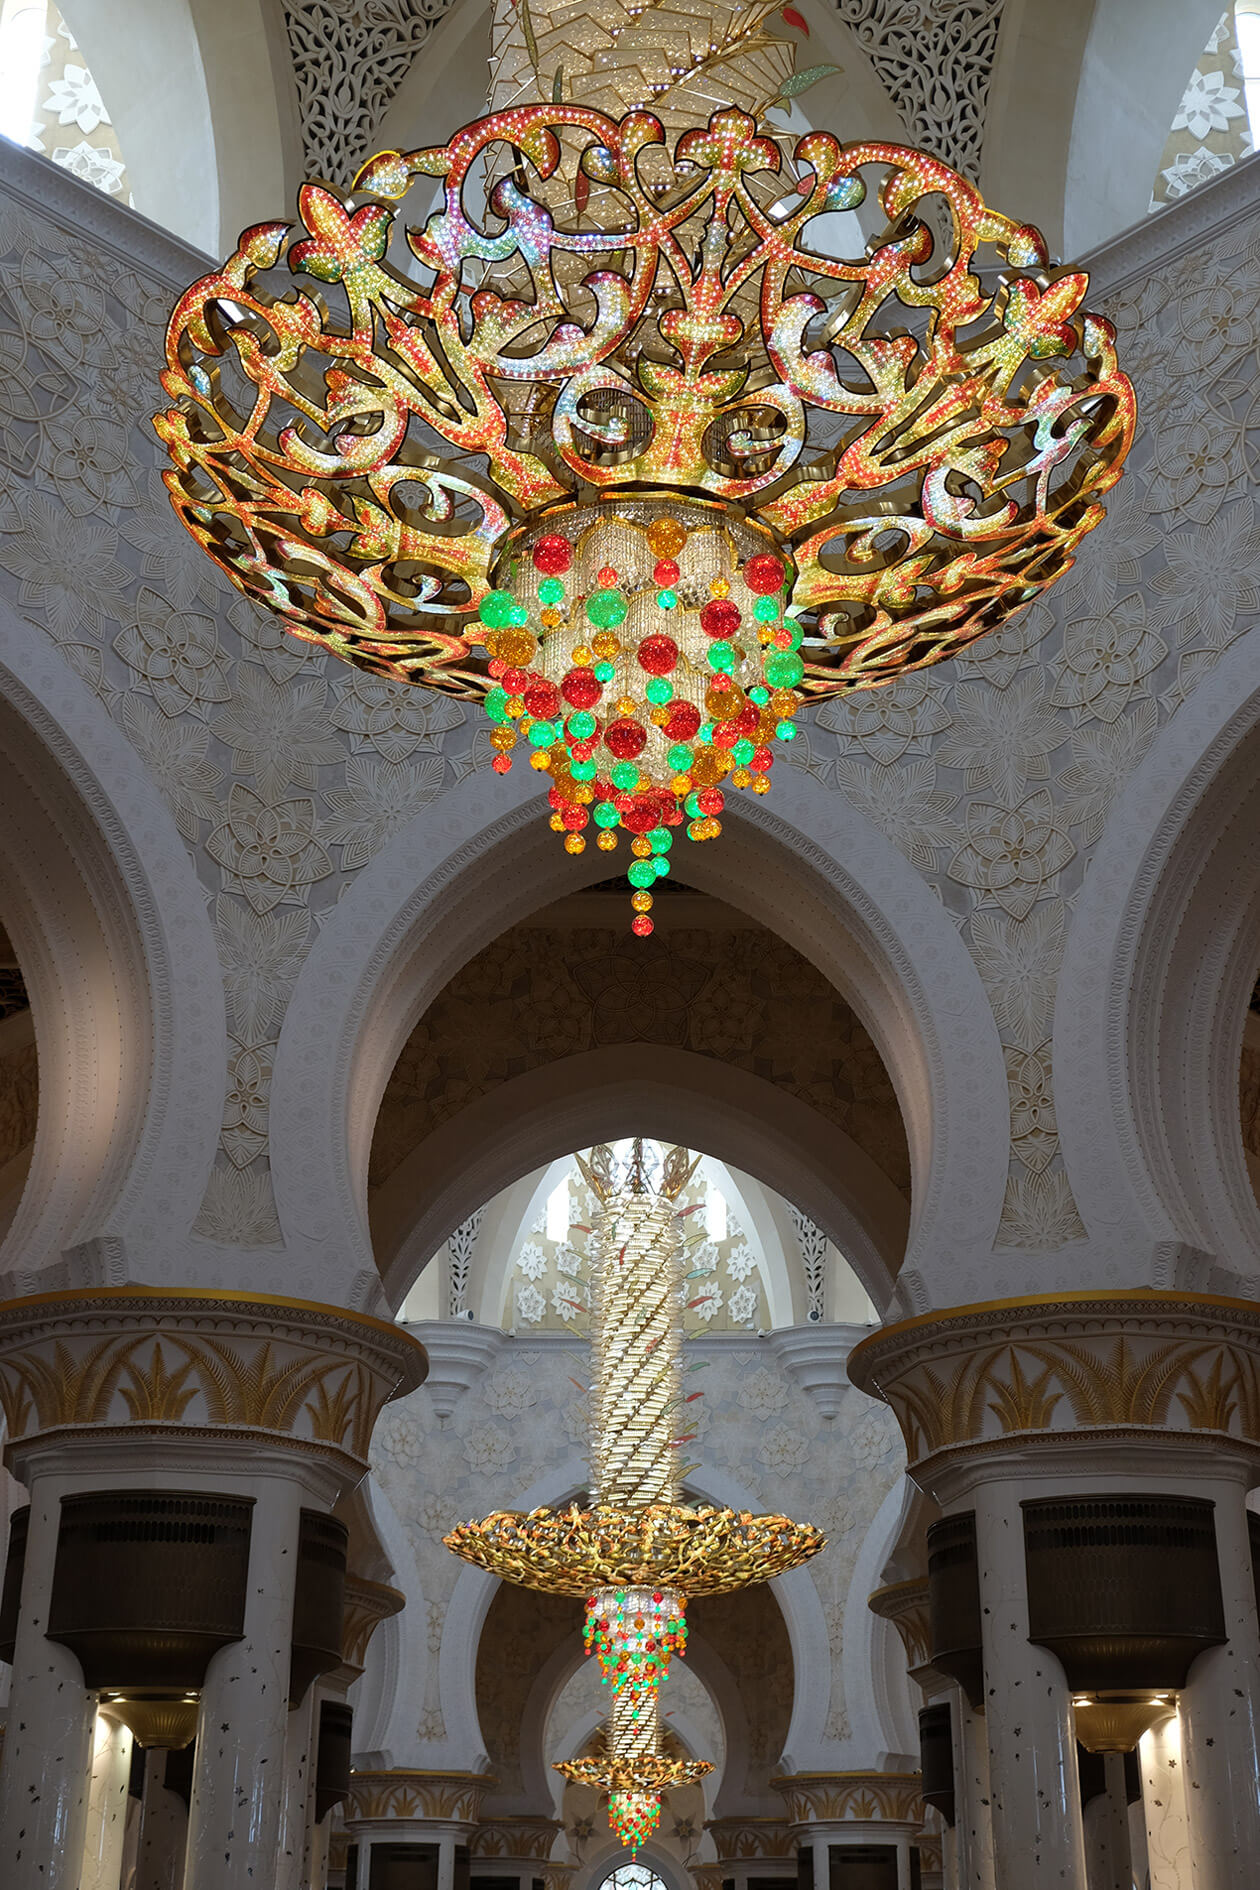 The chandeliers are some of the largest in a mosque. The biggest one weighs 12 tons.